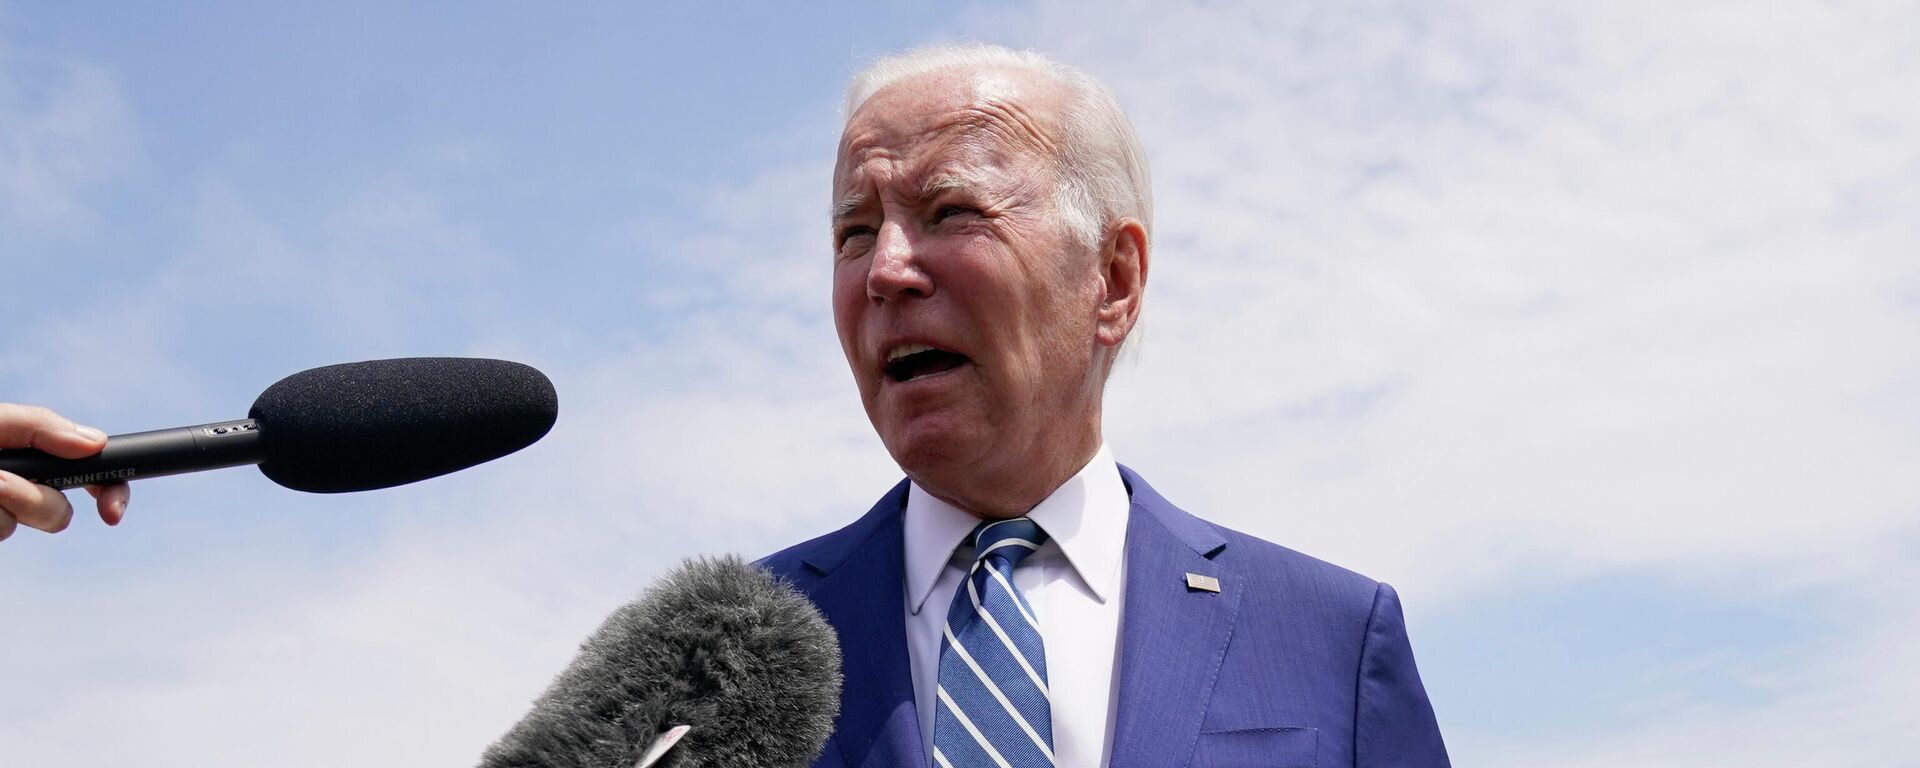 President Joe Biden speaks to reporters before he boards Air Force One for a trip to Los Angeles to attend the Summit of the Americas, Wednesday, June 8, 2022, at Andrews Air Force Base, Md. - Sputnik International, 1920, 10.06.2022